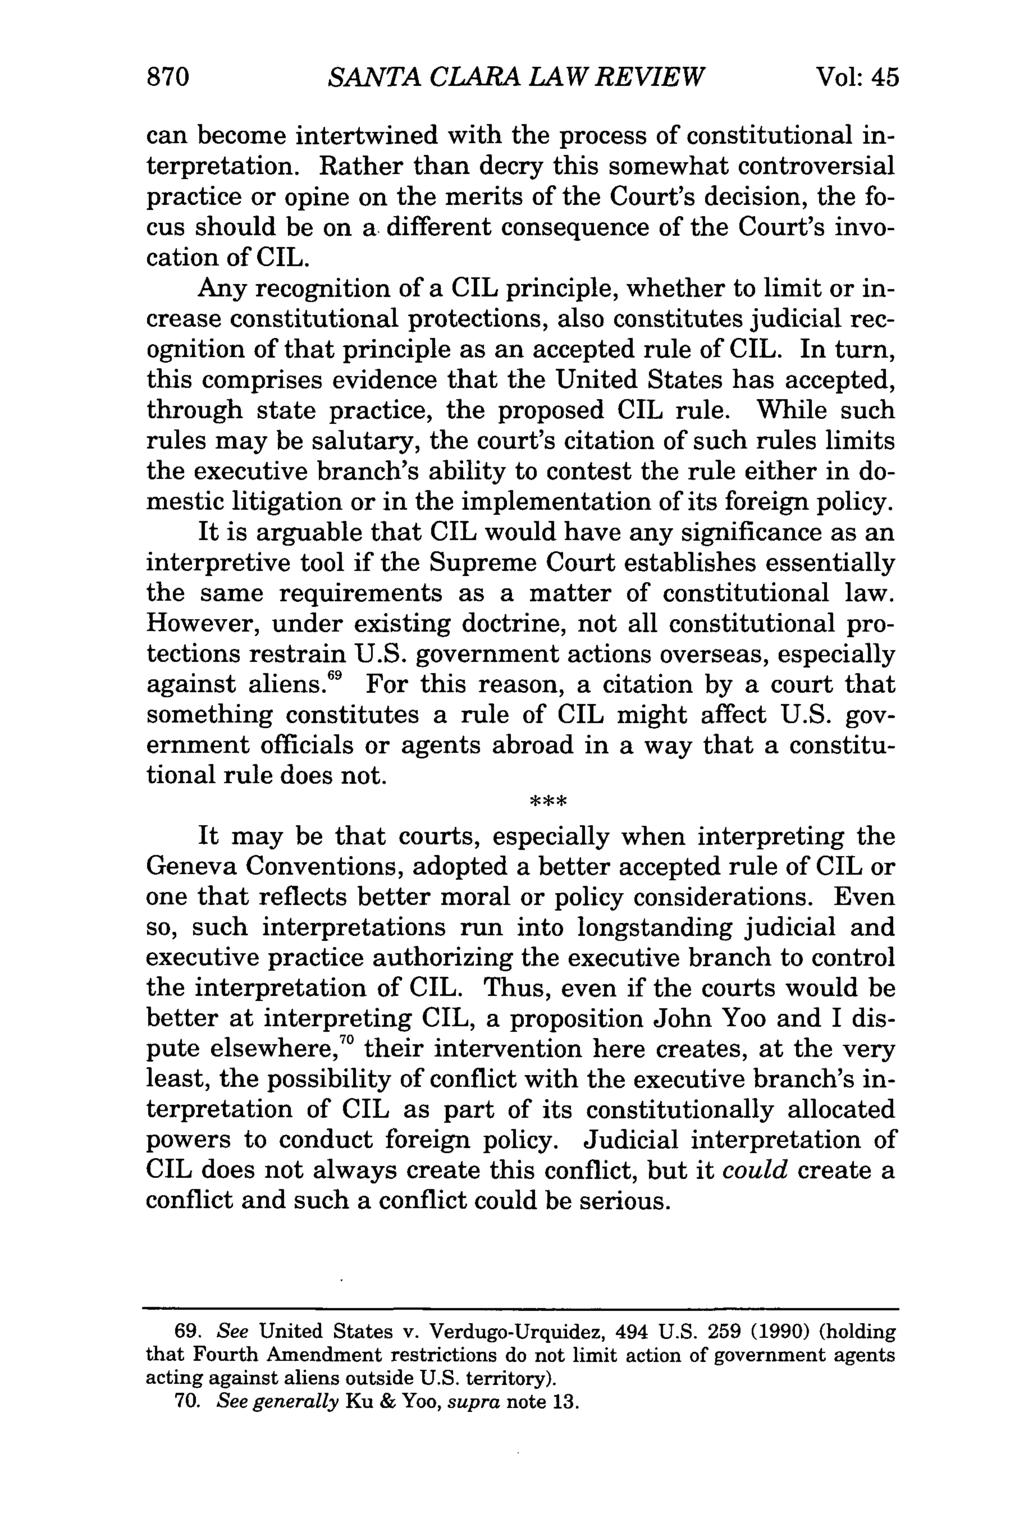 870 SANTA CLARA LAW REVIEW Vol: 45 can become intertwined with the process of constitutional interpretation.